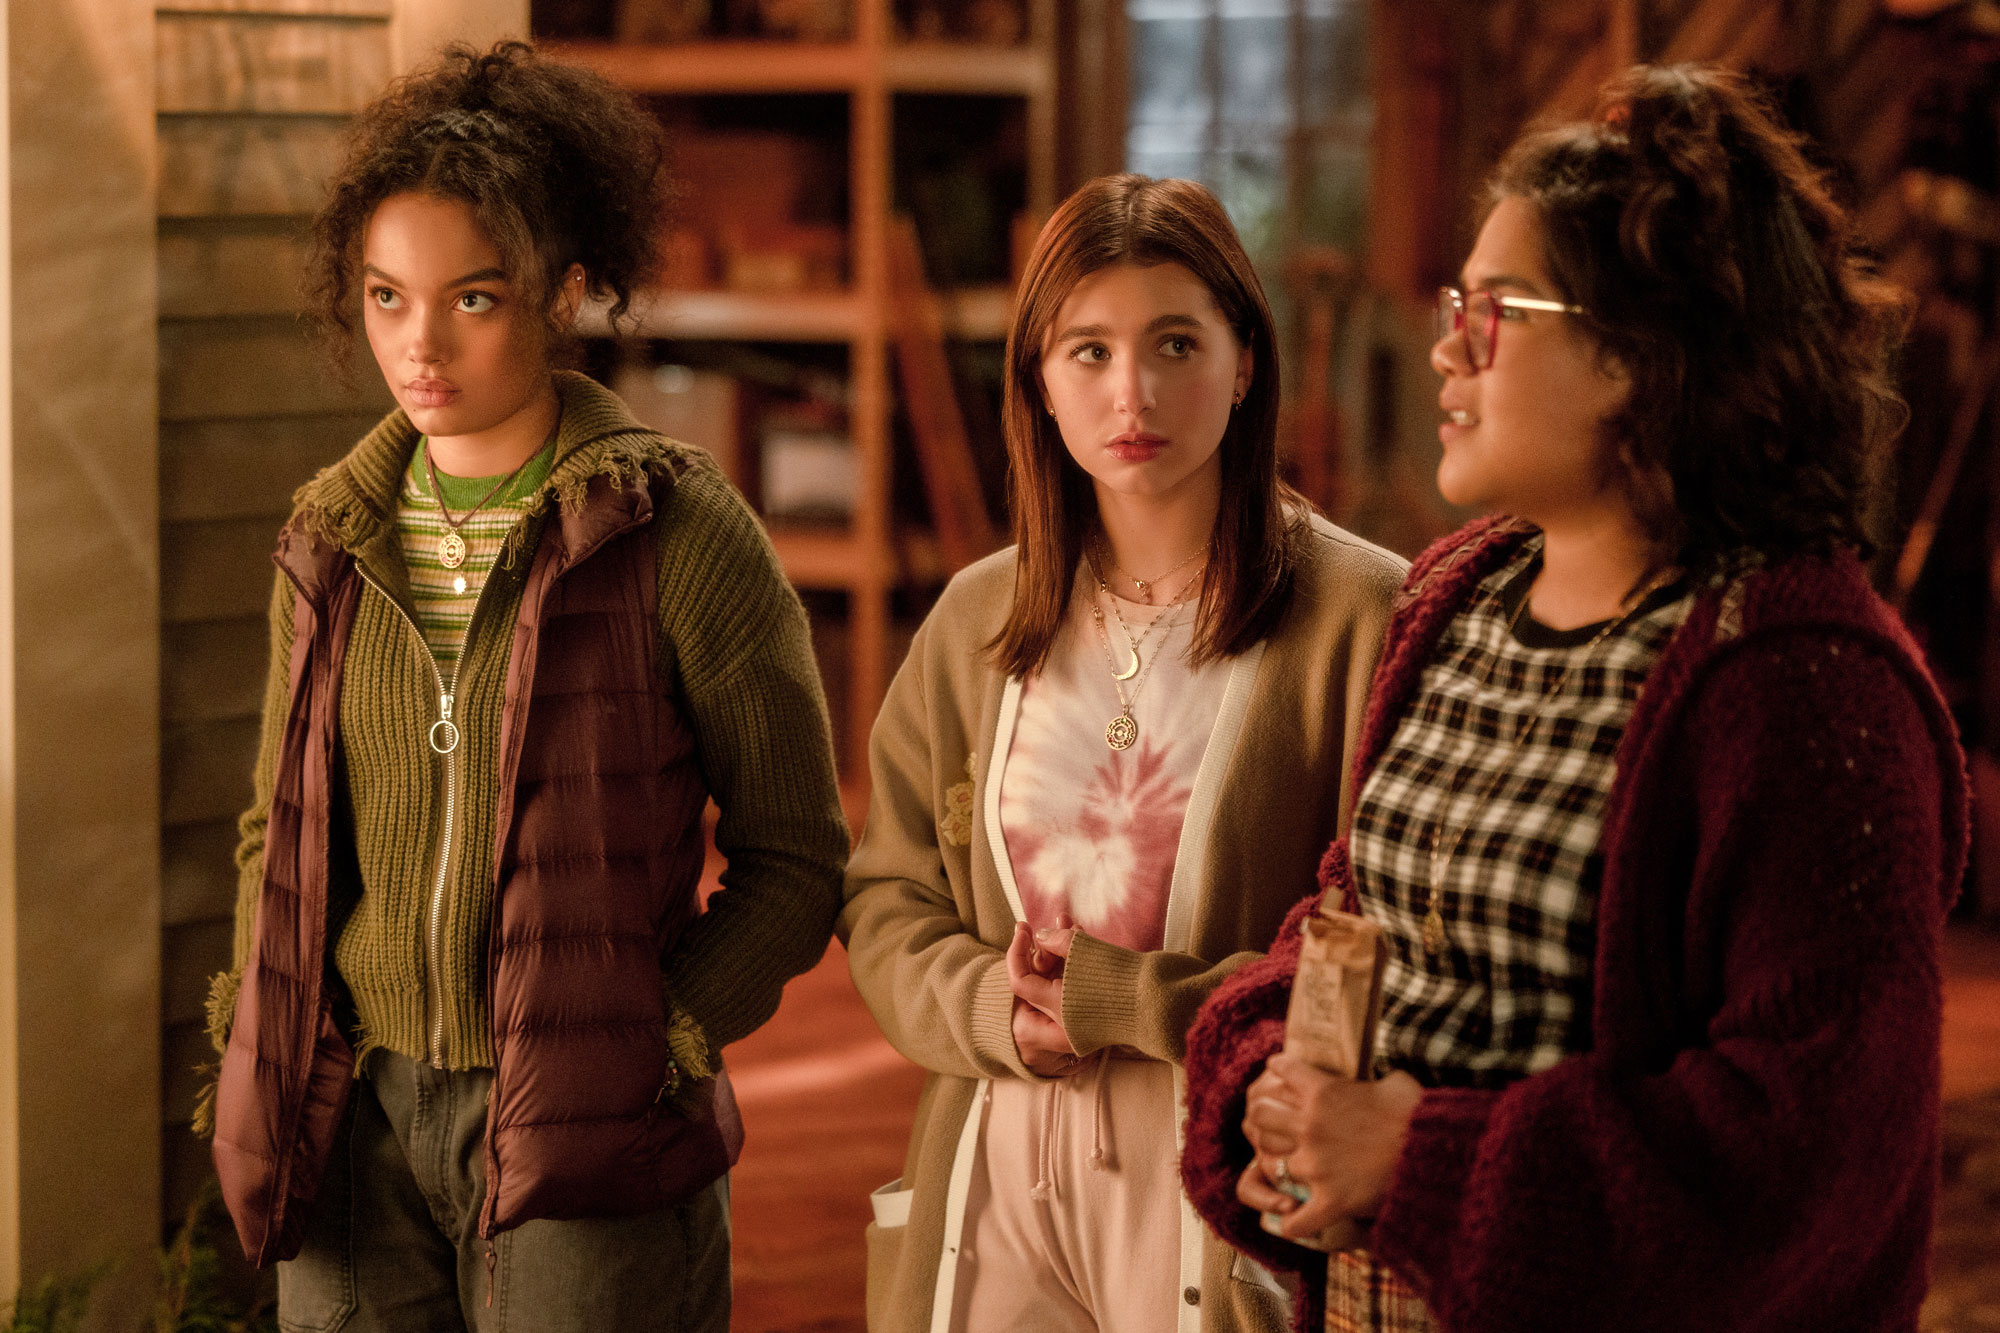 (L-R): Whitney Peak as Becca, Lilia Buckingham as Cassie, and Belissa Escobedo as Izzy in HOCUS POCUS 2, exclusively on Disney+. Photo by Matt Kennedy. © 2022 Disney Enterprises, Inc. All Rights Reserved.